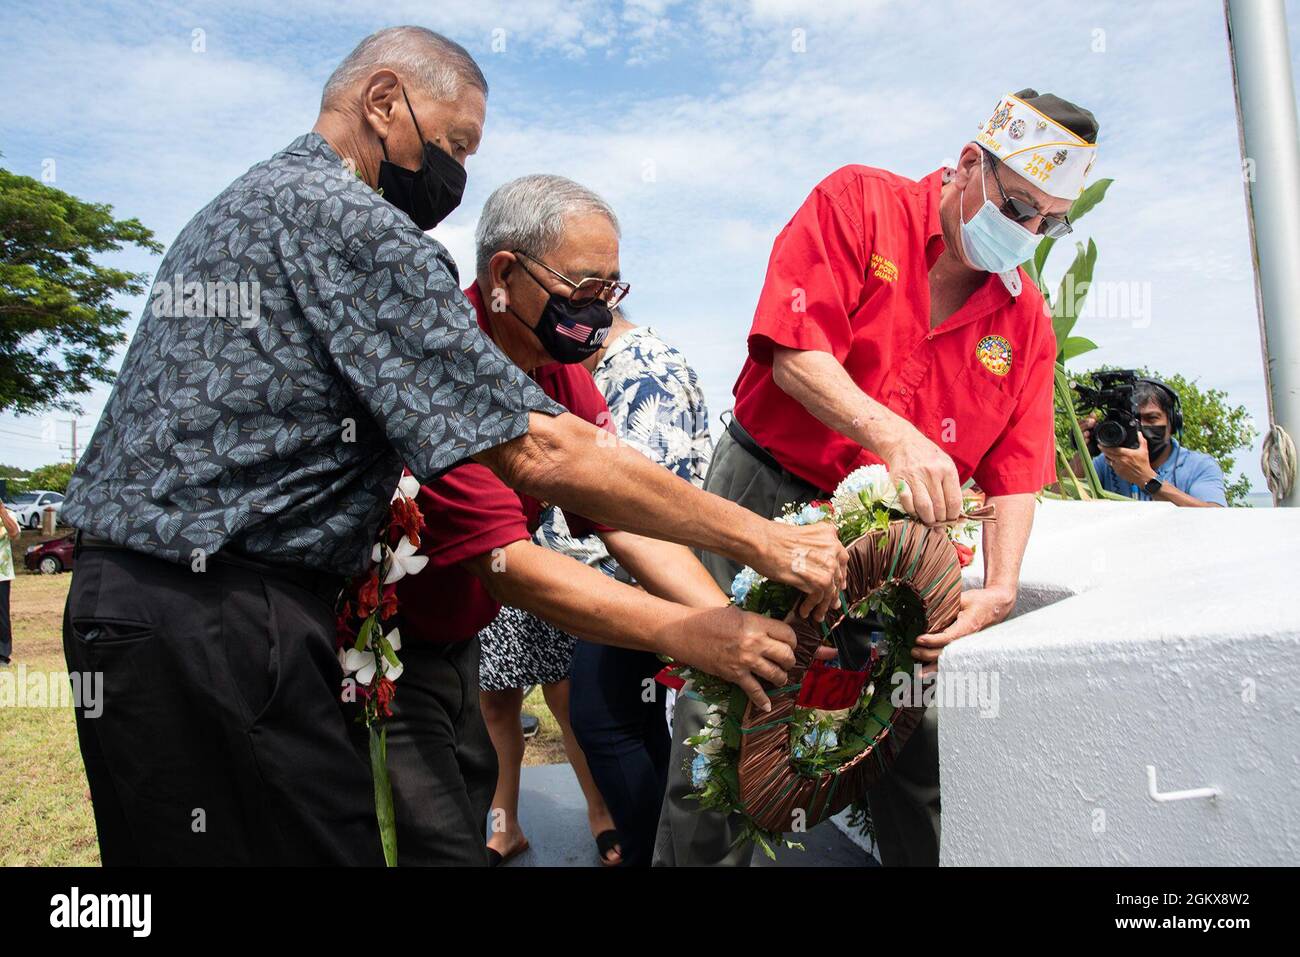 ASAN, Guam (July 19, 2021) -  Asan-Maina Mayor Frankie Salas joins the VFW Post 2917 as they lay a wreath during the Asan Beach Landing Memorial ceremony July 16. Military service members, local government officials and residents gathered to recall the U.S. military’s liberation of Guam during World War II. The site of the ceremony is where the 3rd Marine Division planted the U.S. flag after securing the beachhead. Approximately 55,000 Marines and Army soldiers participated in the battle for Guam. More than 1,800 American service members were killed in action or died of wounds during the first Stock Photo